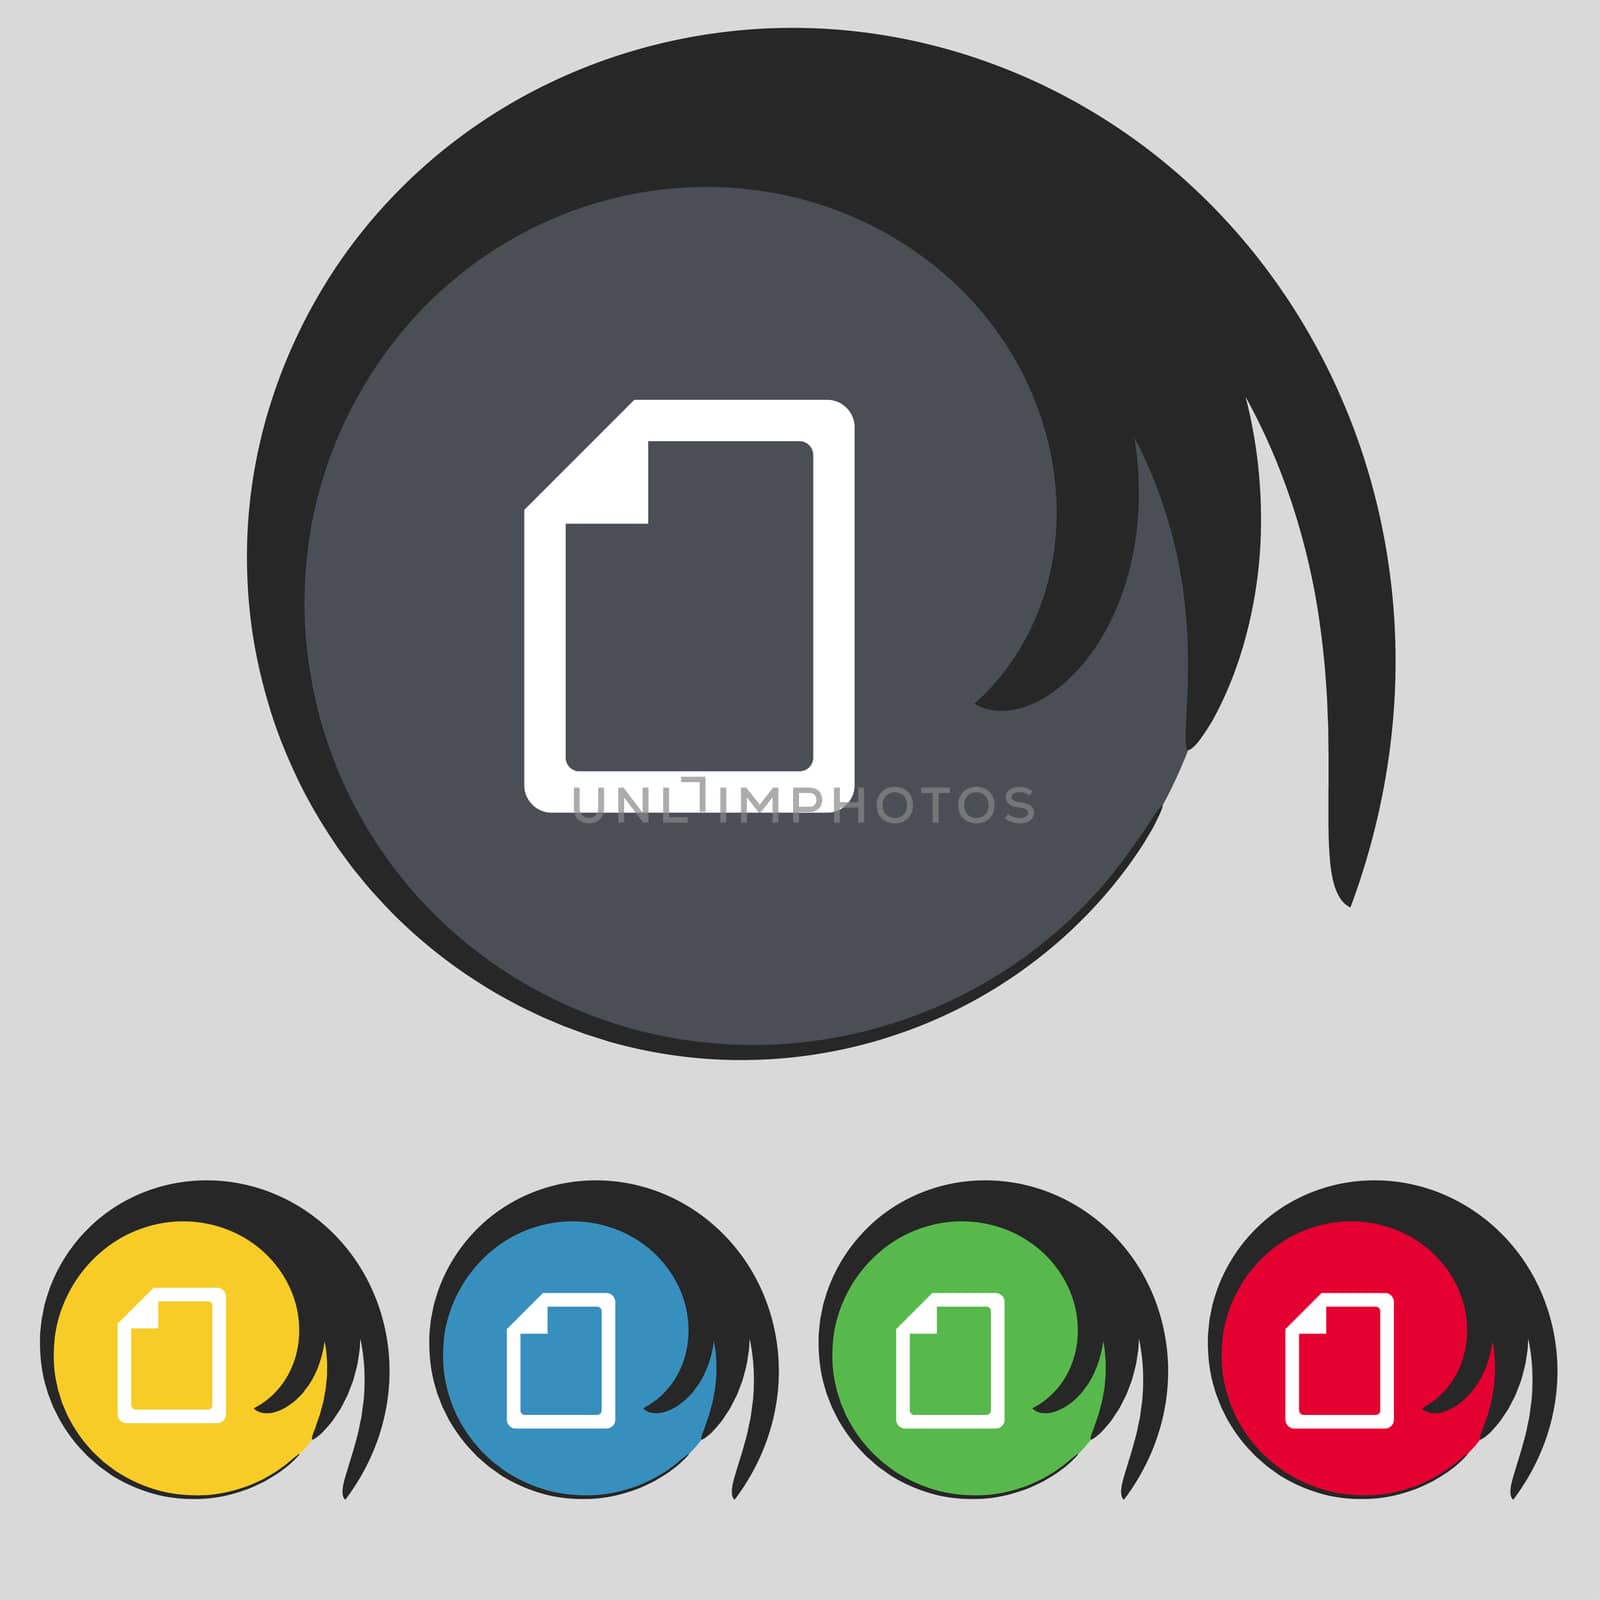 Text file icon sign. Symbol on five colored buttons. illustration